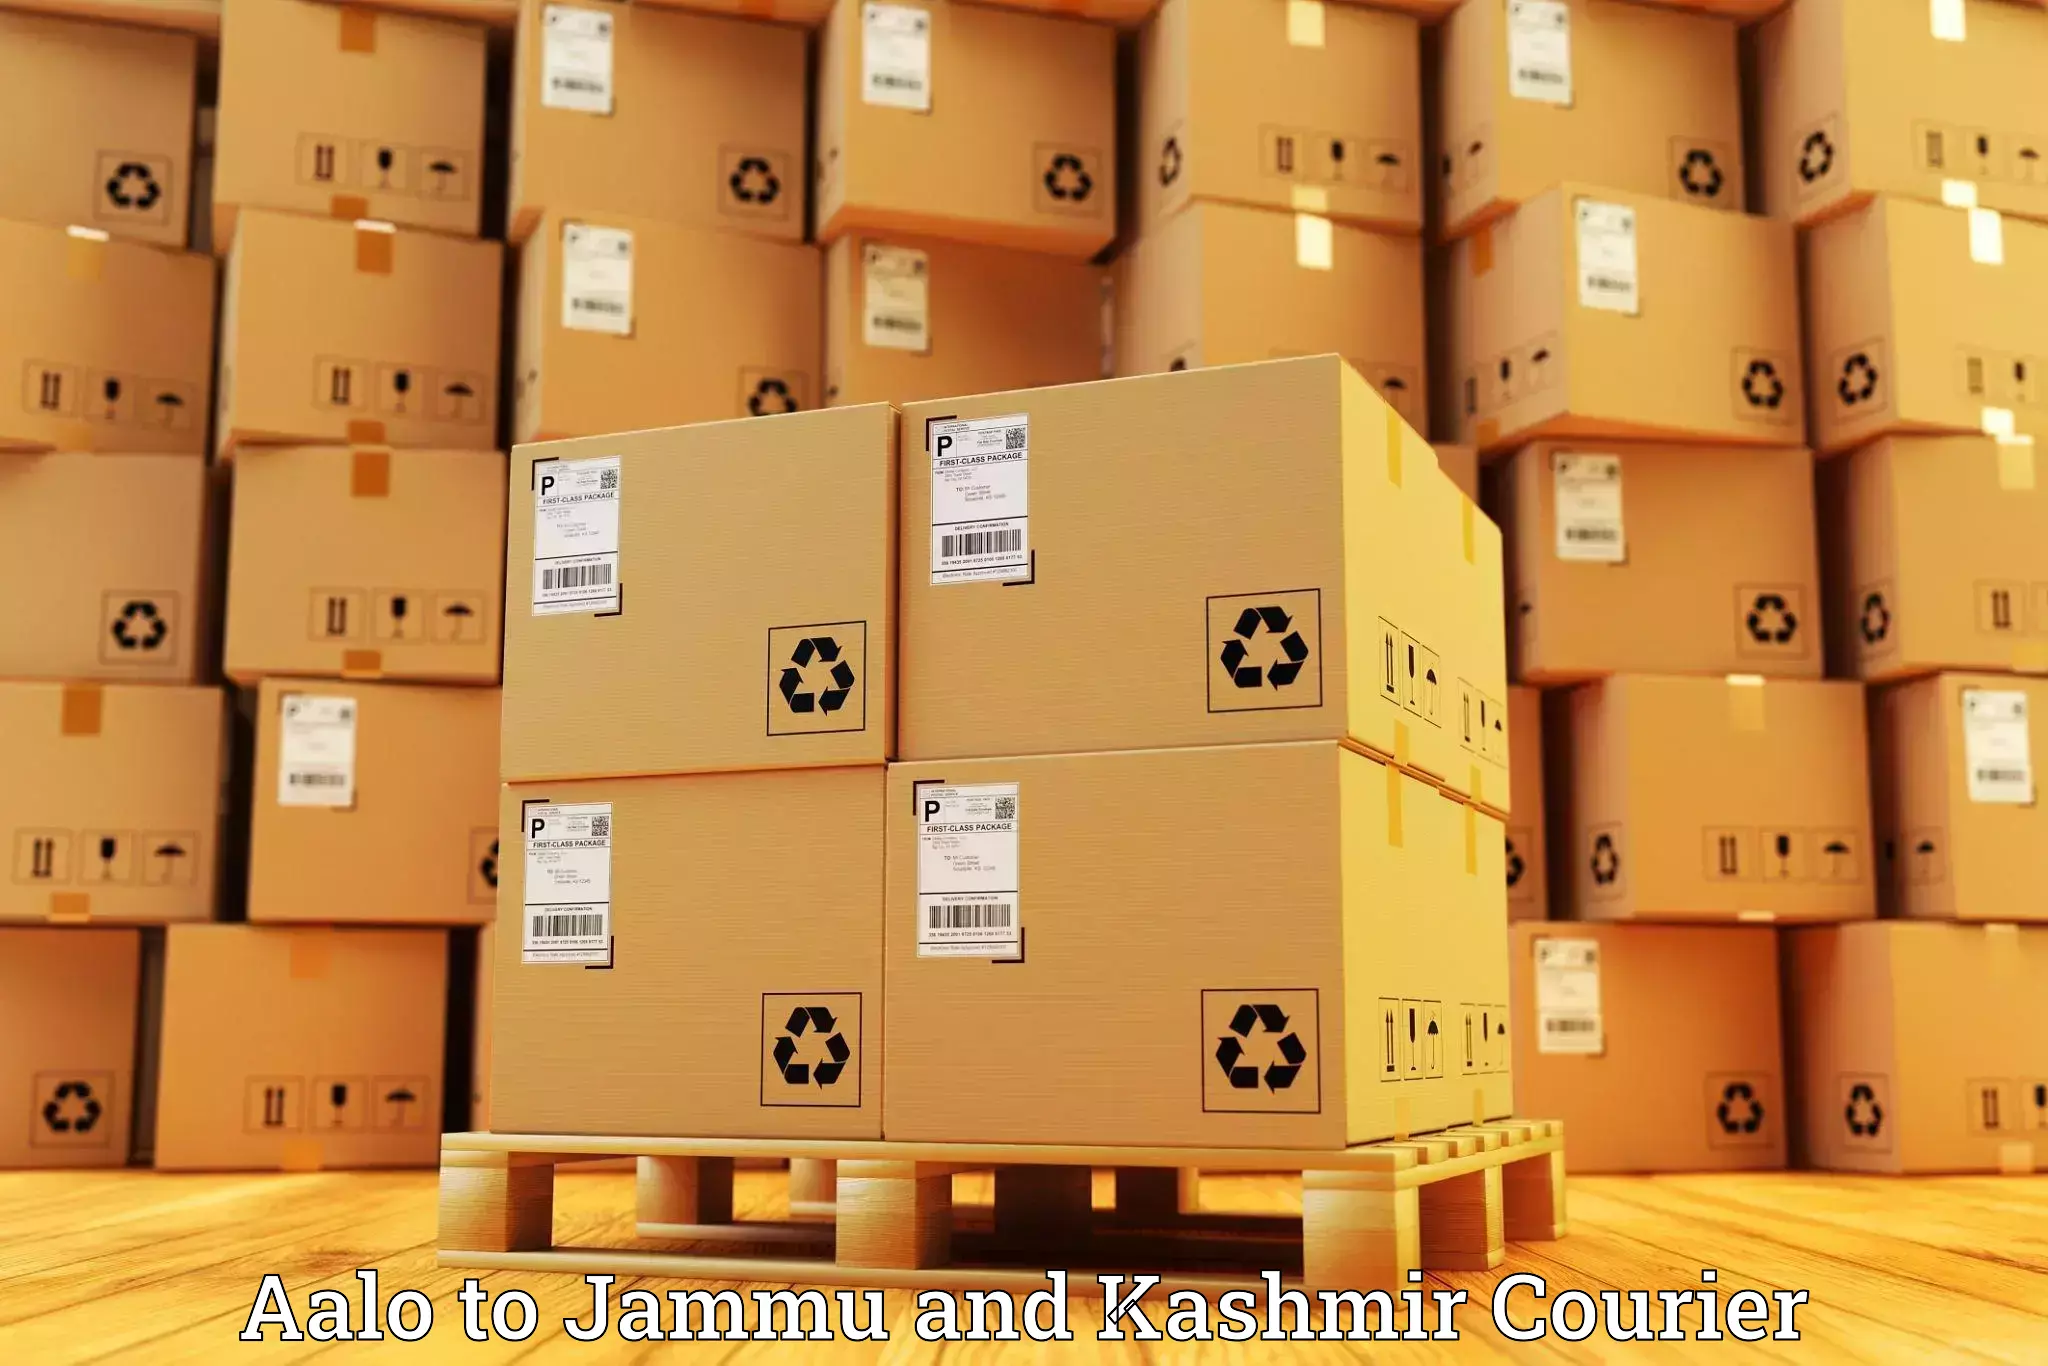 Luggage transport consultancy Aalo to Jammu and Kashmir